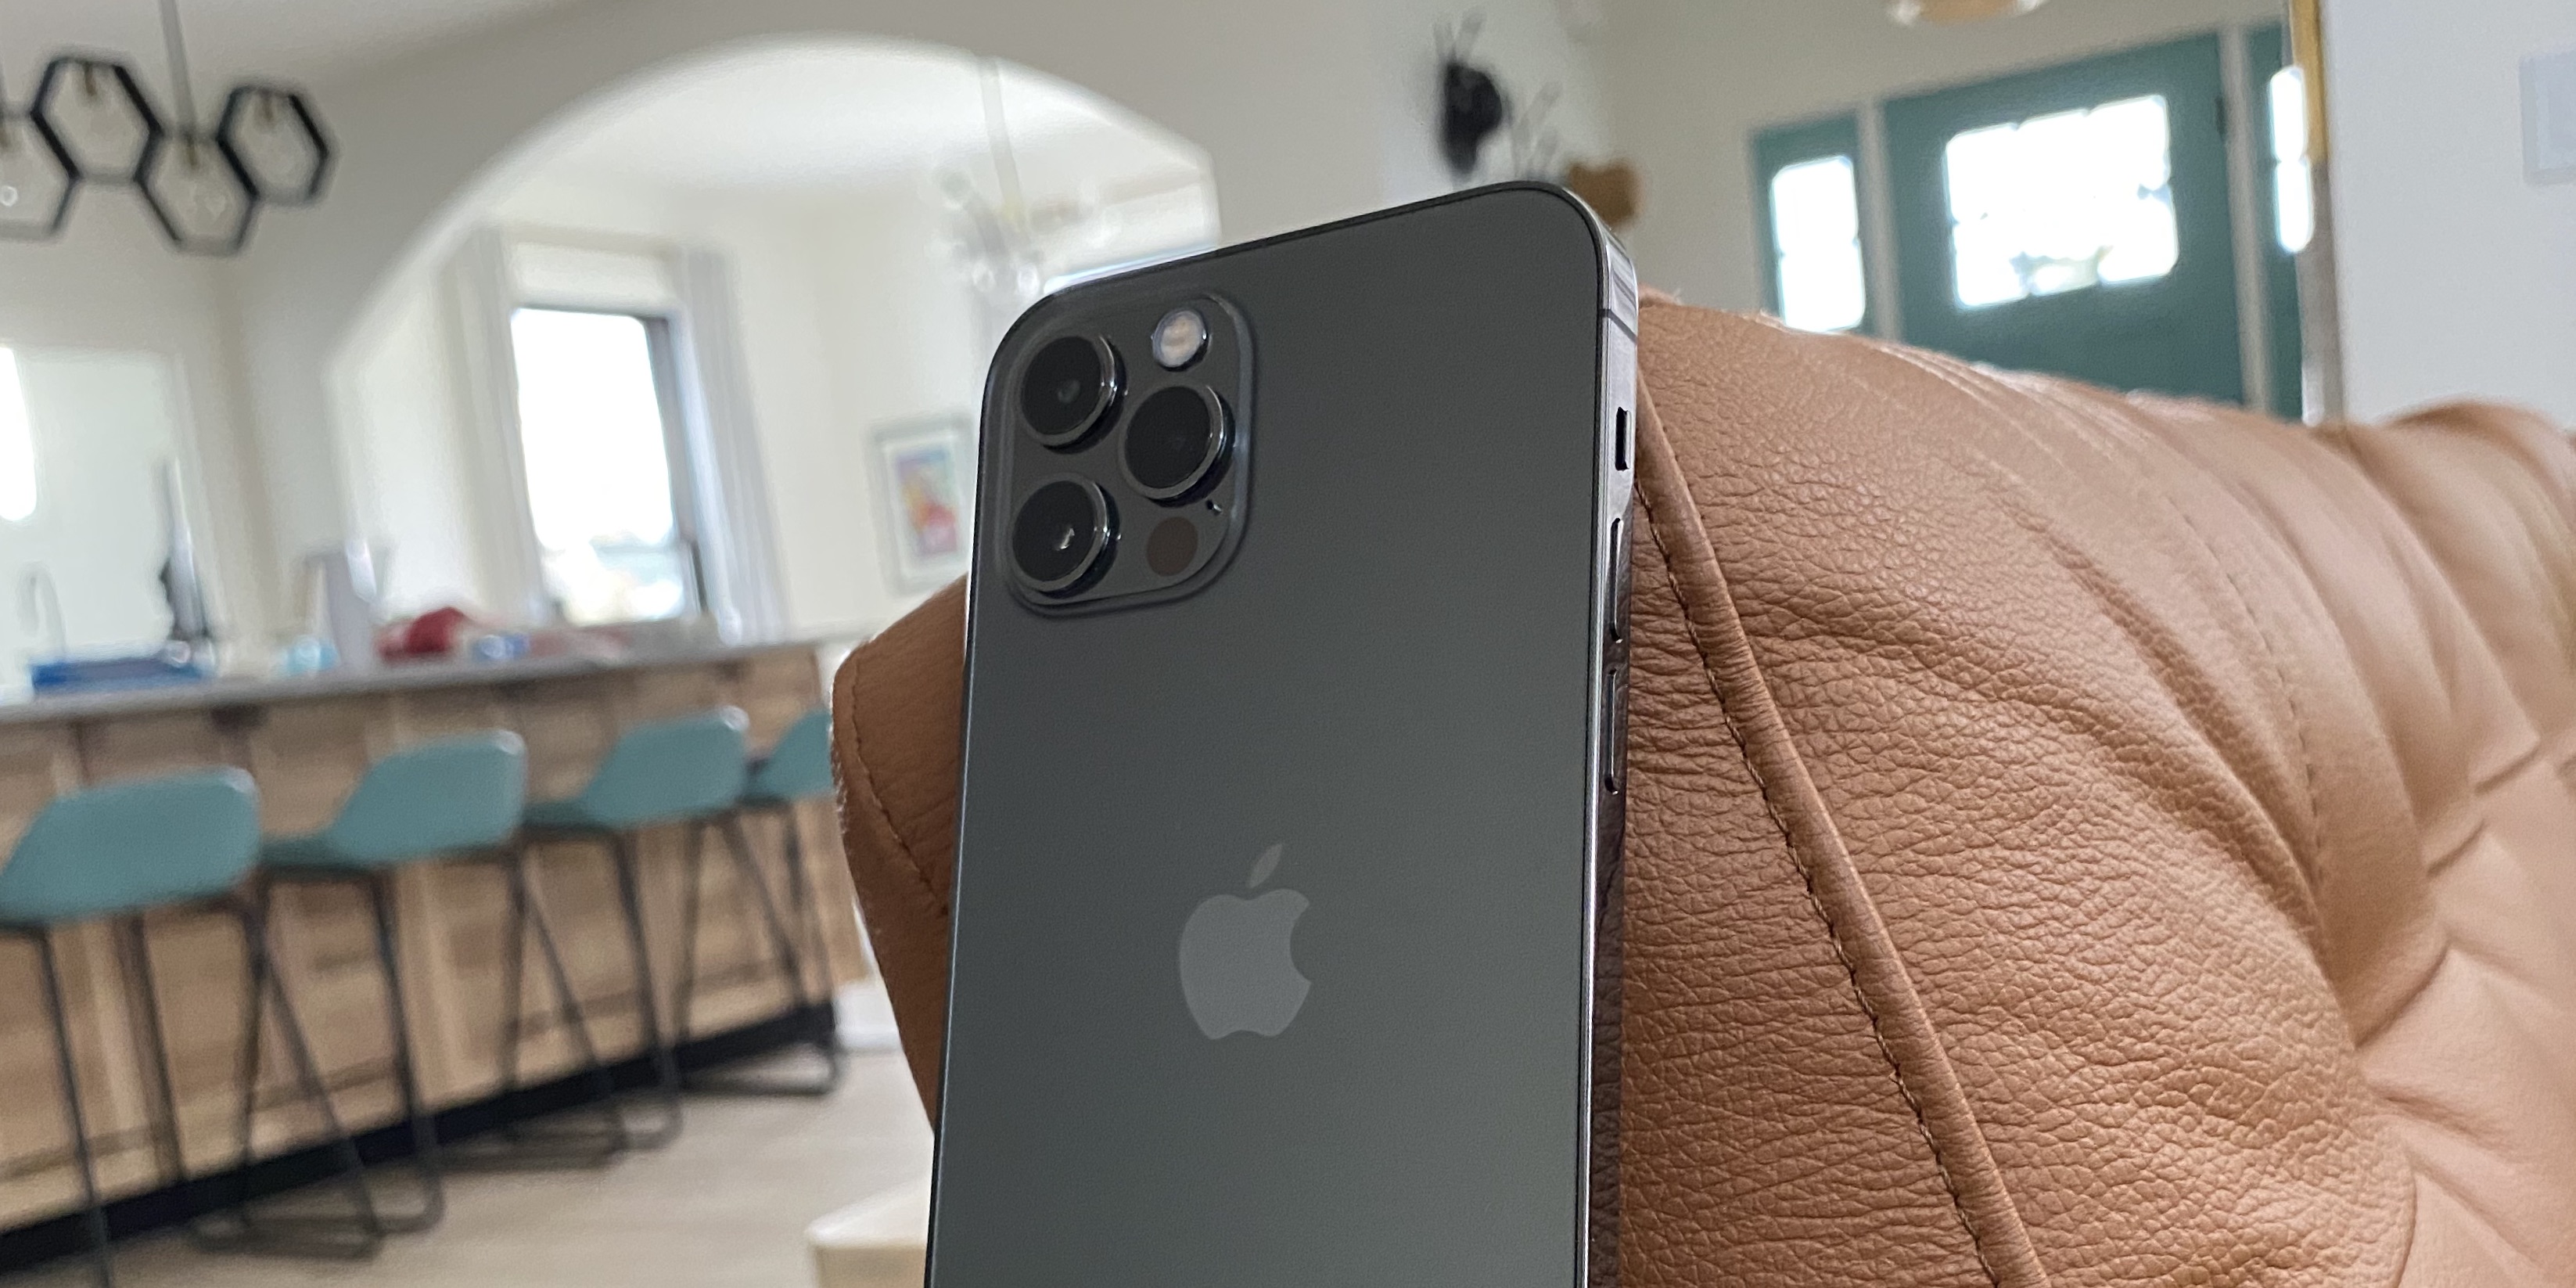 Iphone 12 Pro Scores 128 In Dxomark Camera Test Ranked In Fourth Place Overall 9to5mac